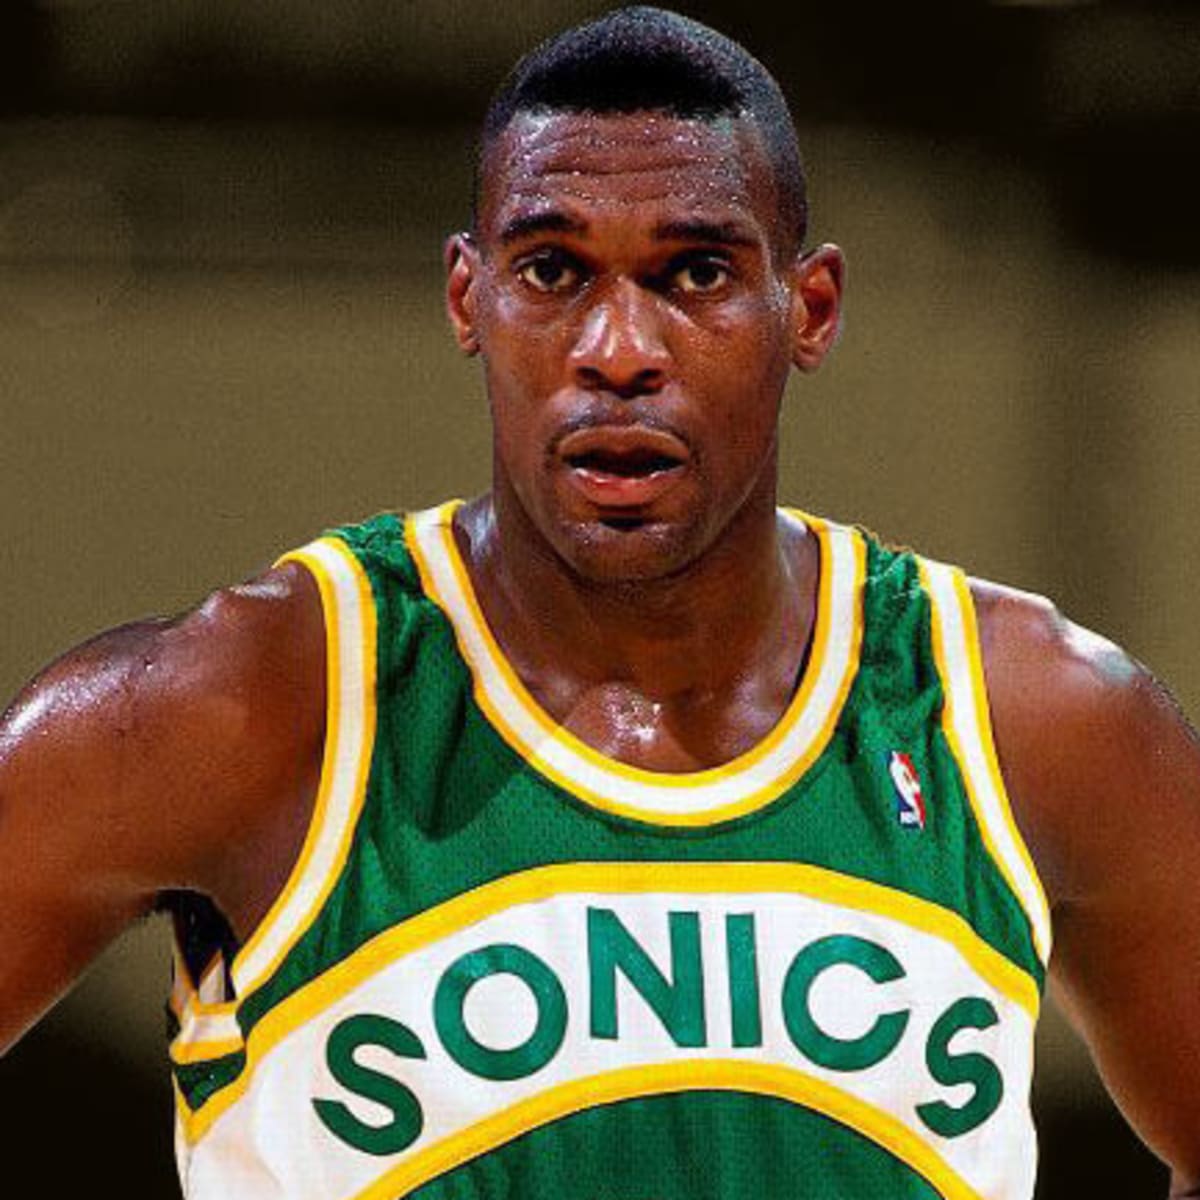 Once a high-flying SuperSonic, Shawn Kemp is lighting up Seattle again